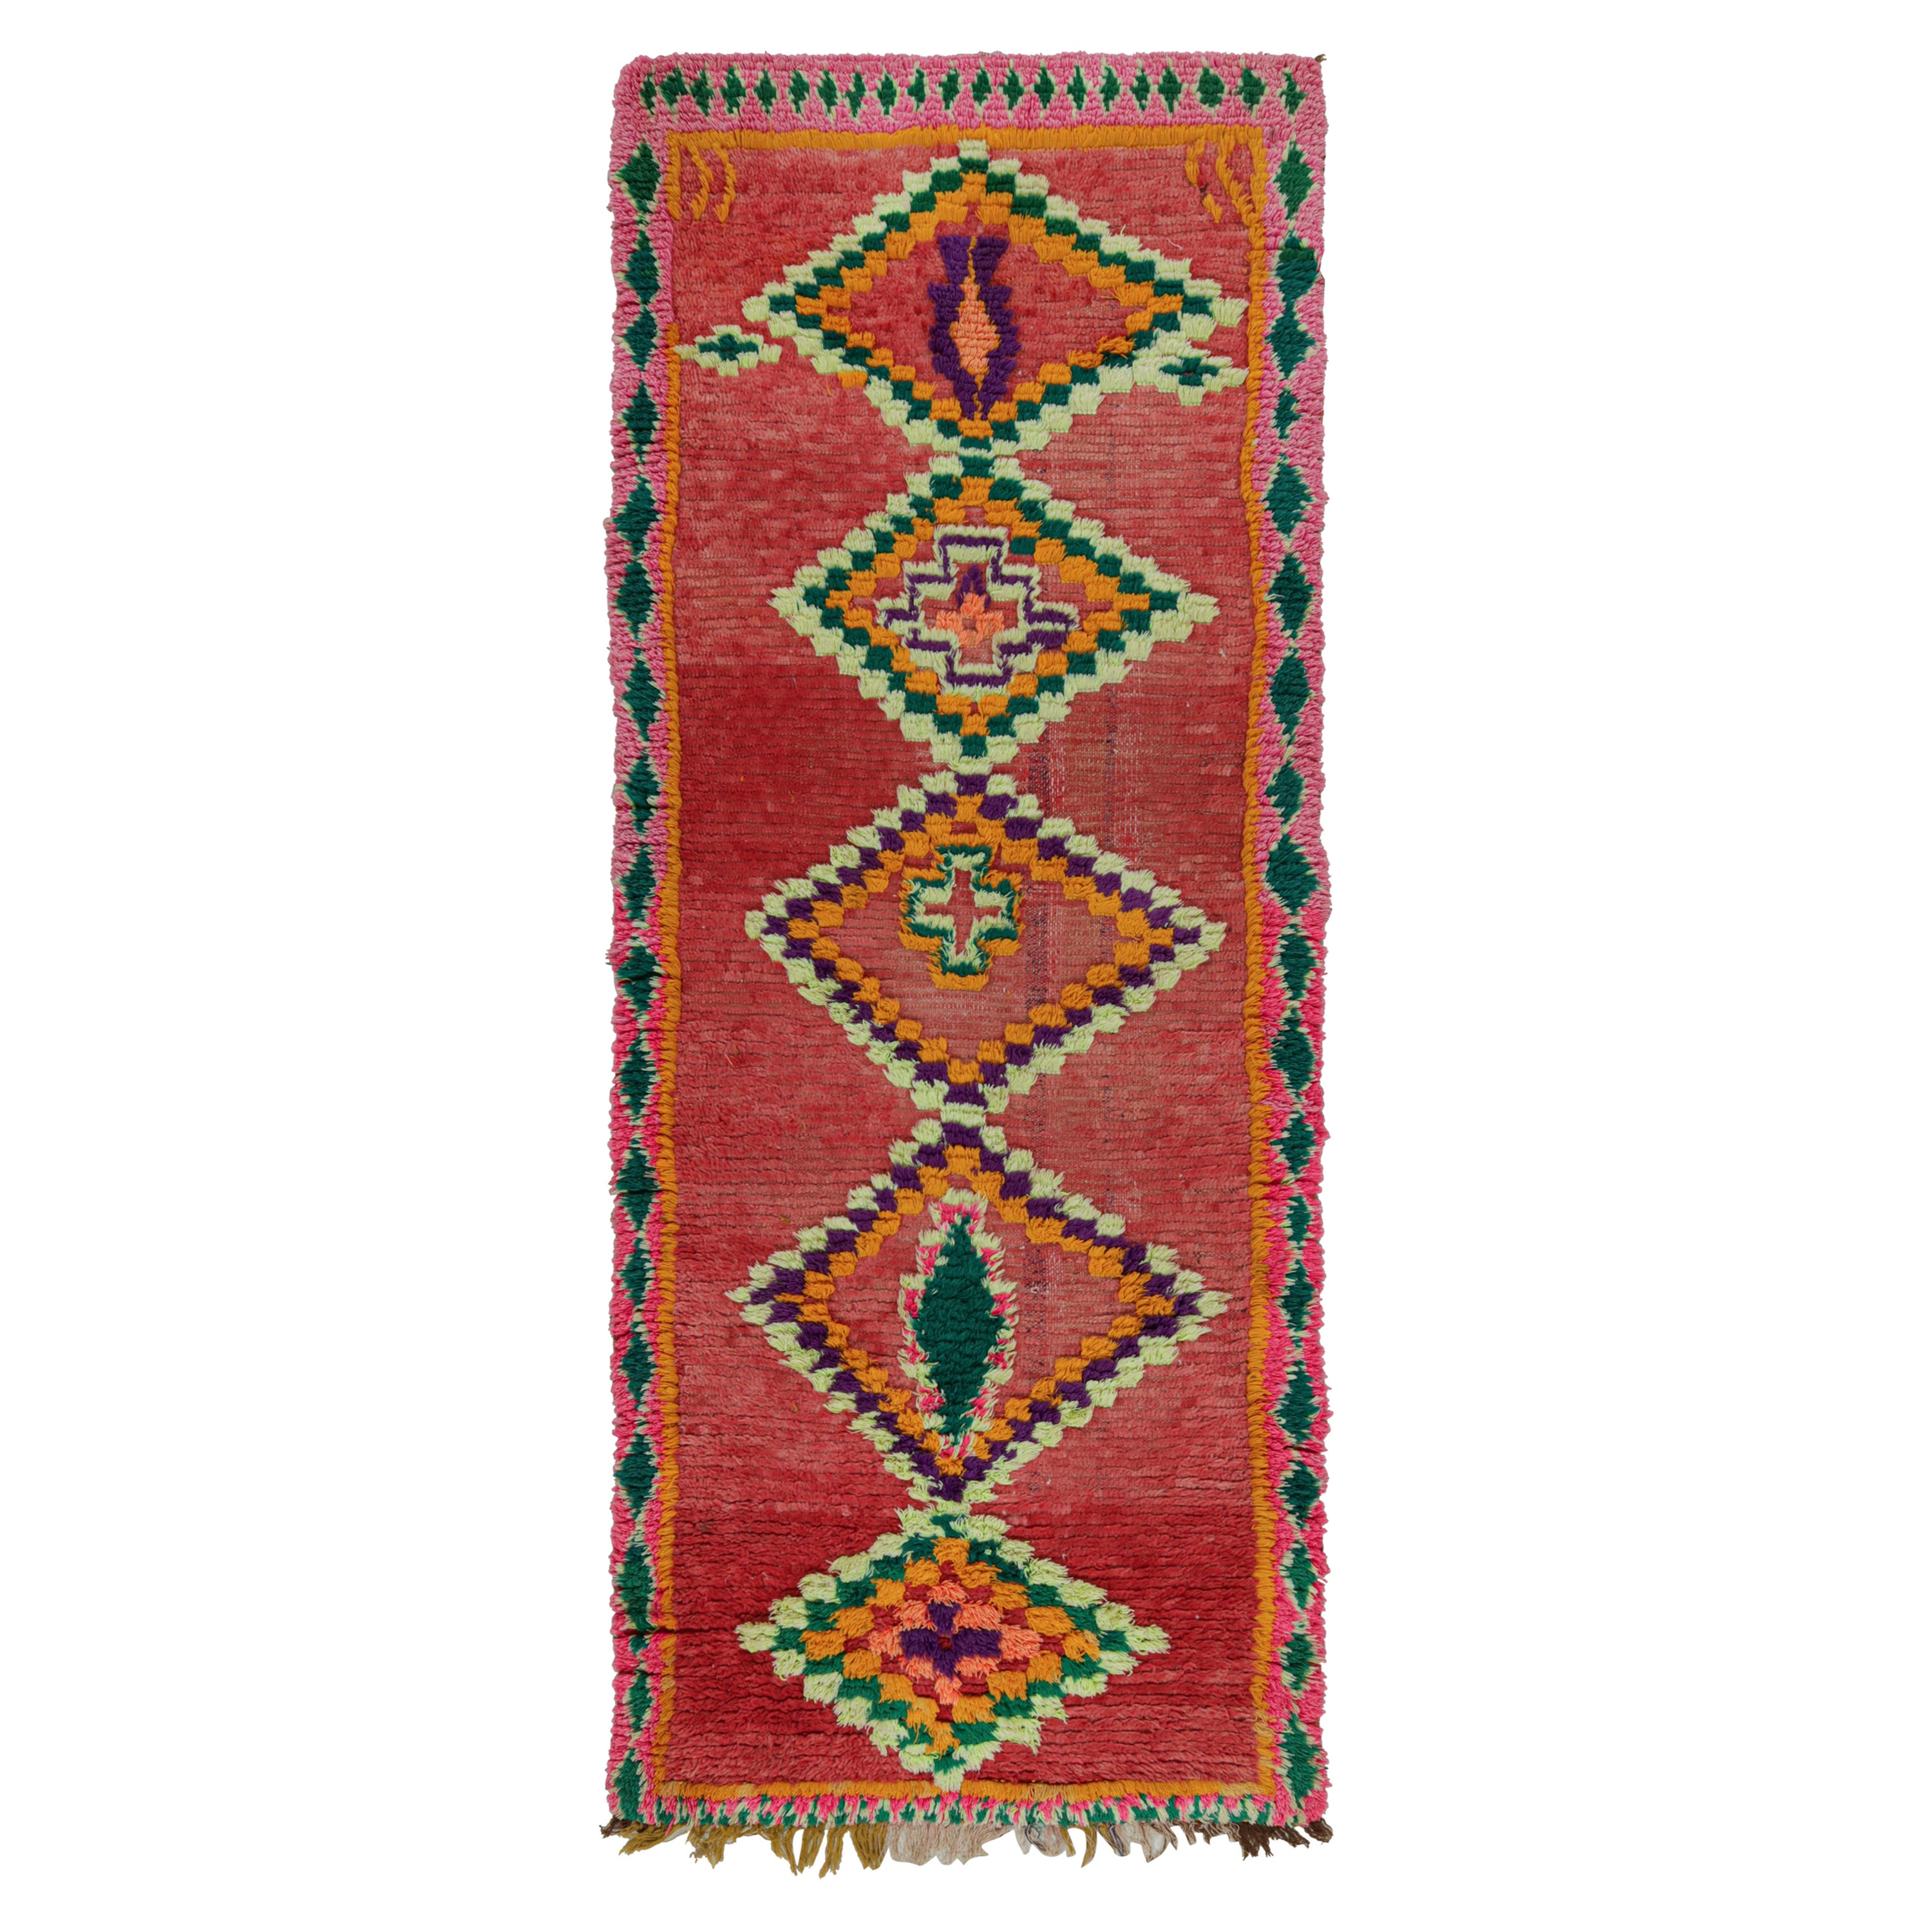 Vintage Moroccan Runner Rug in Red with Diamond Medallions, from Rug & Kilim 